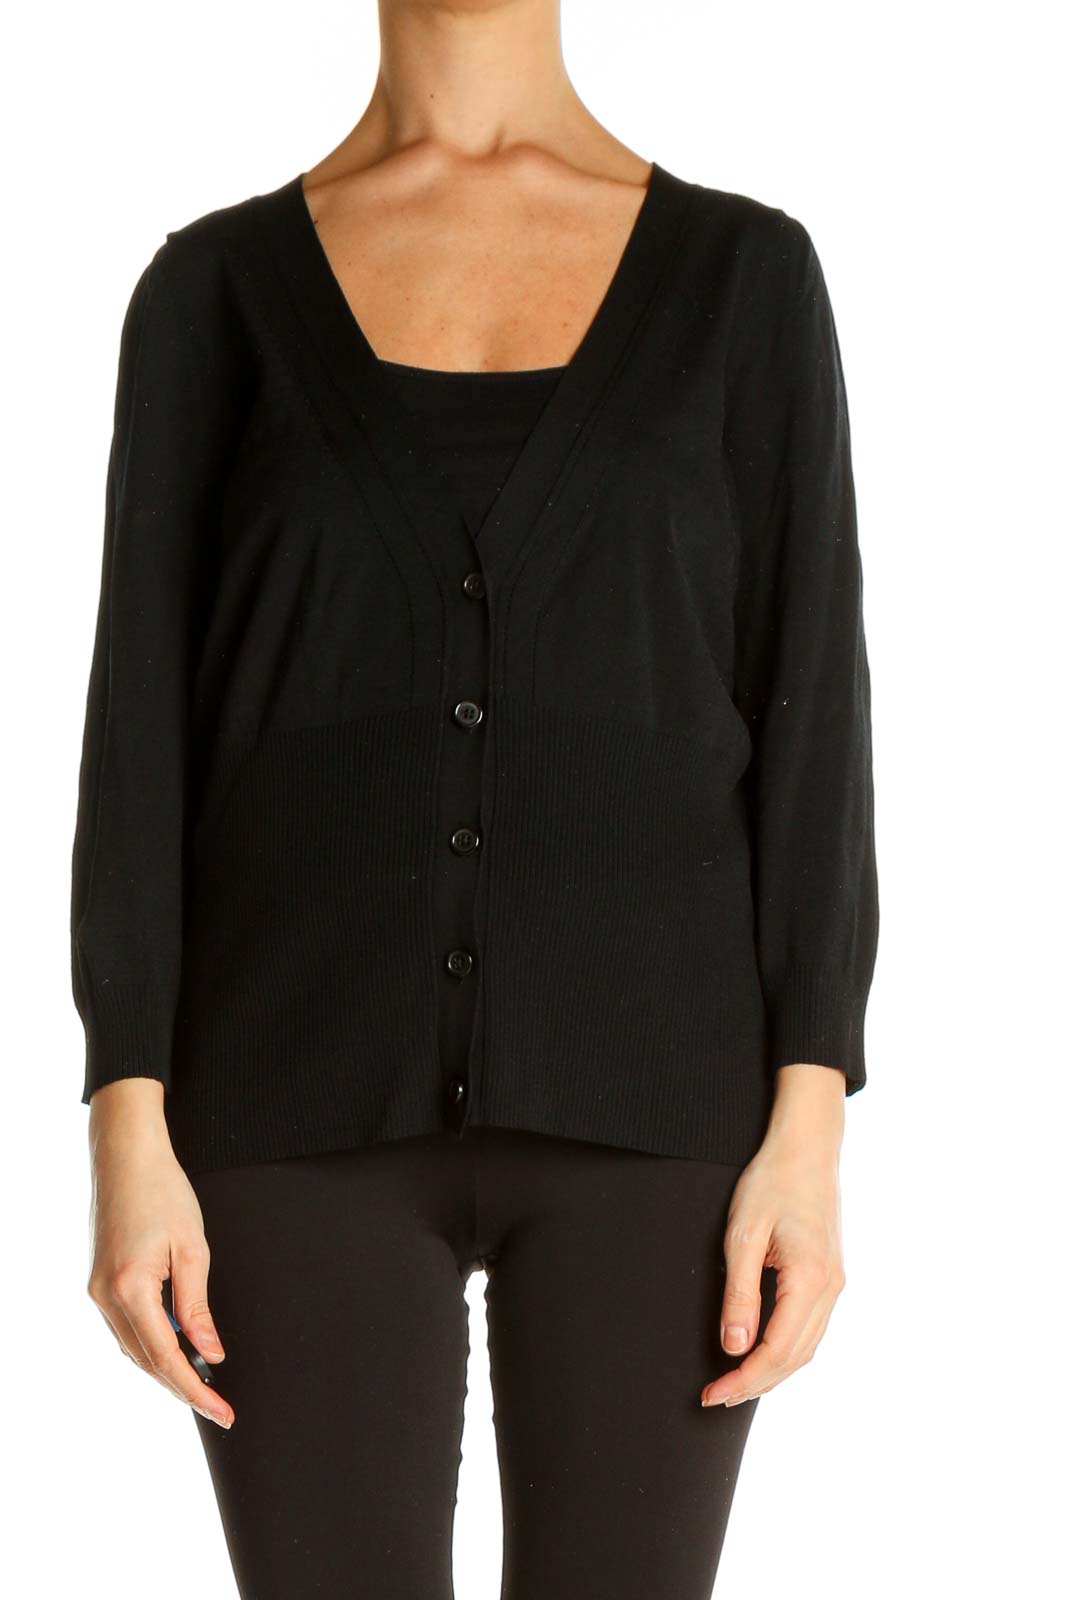 Black Solid All Day Wear Sweater Front